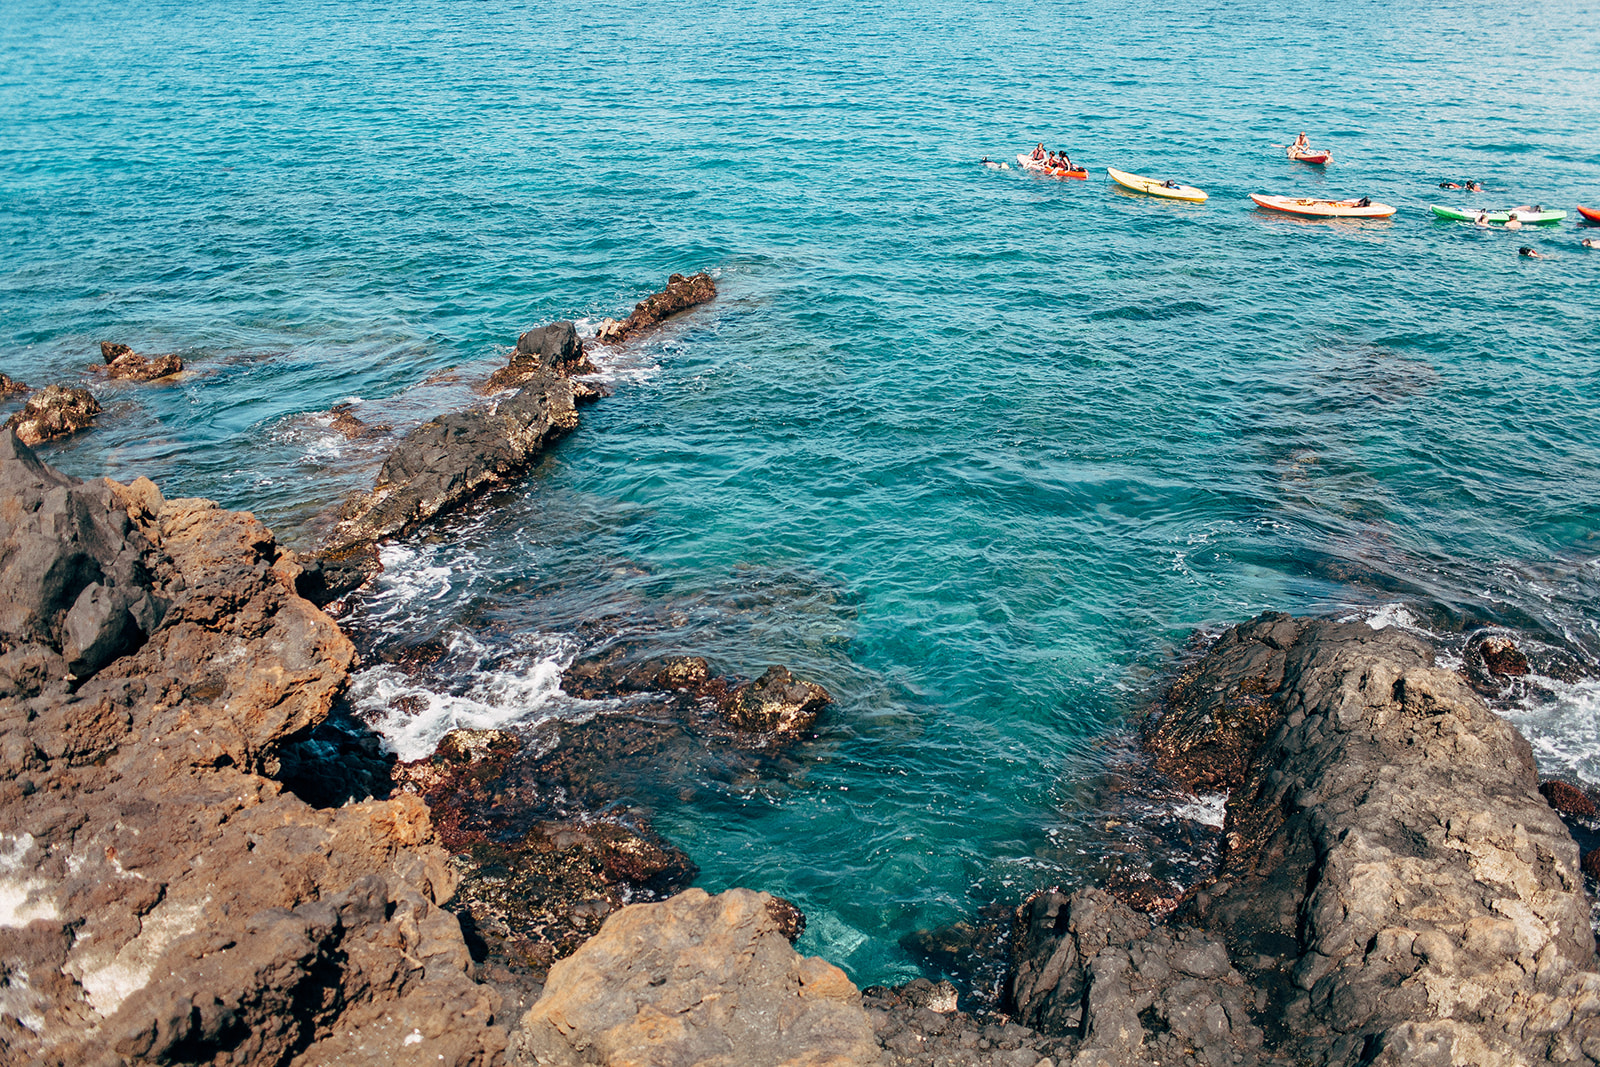 Kayaks on the crystal clear blue waters of south Maui